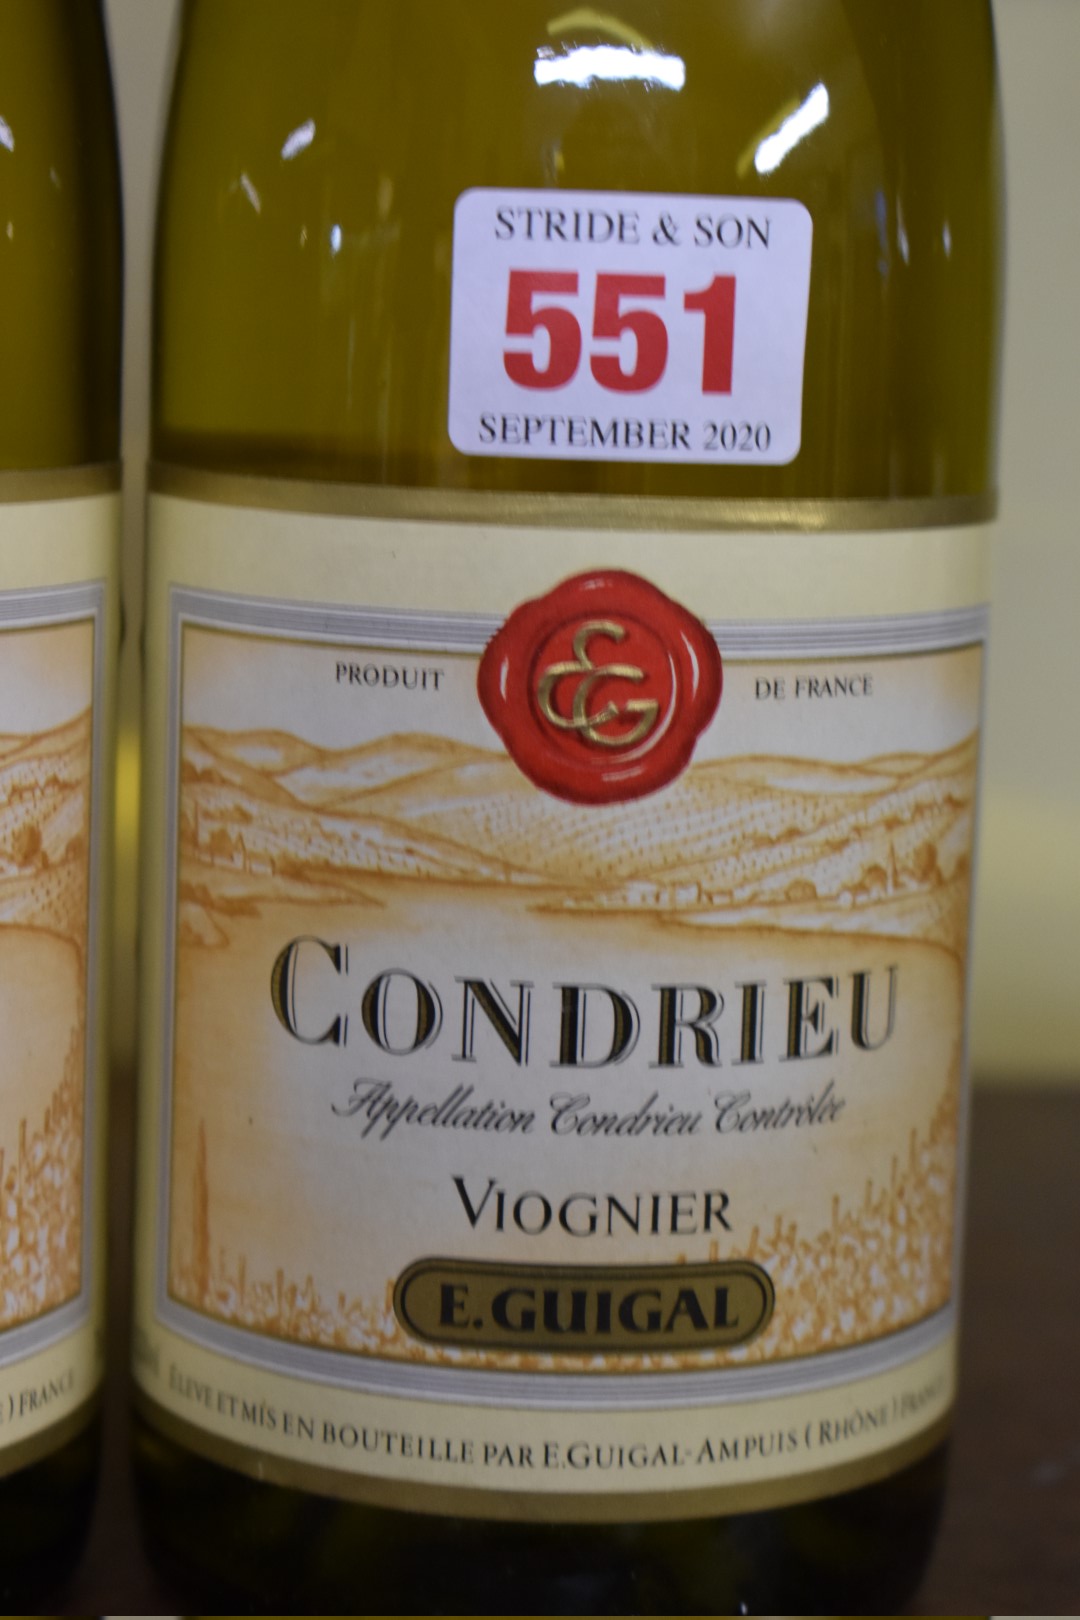 Two 75cl bottles of Condrieu, 1991, E Guigal. (2) - Image 2 of 3